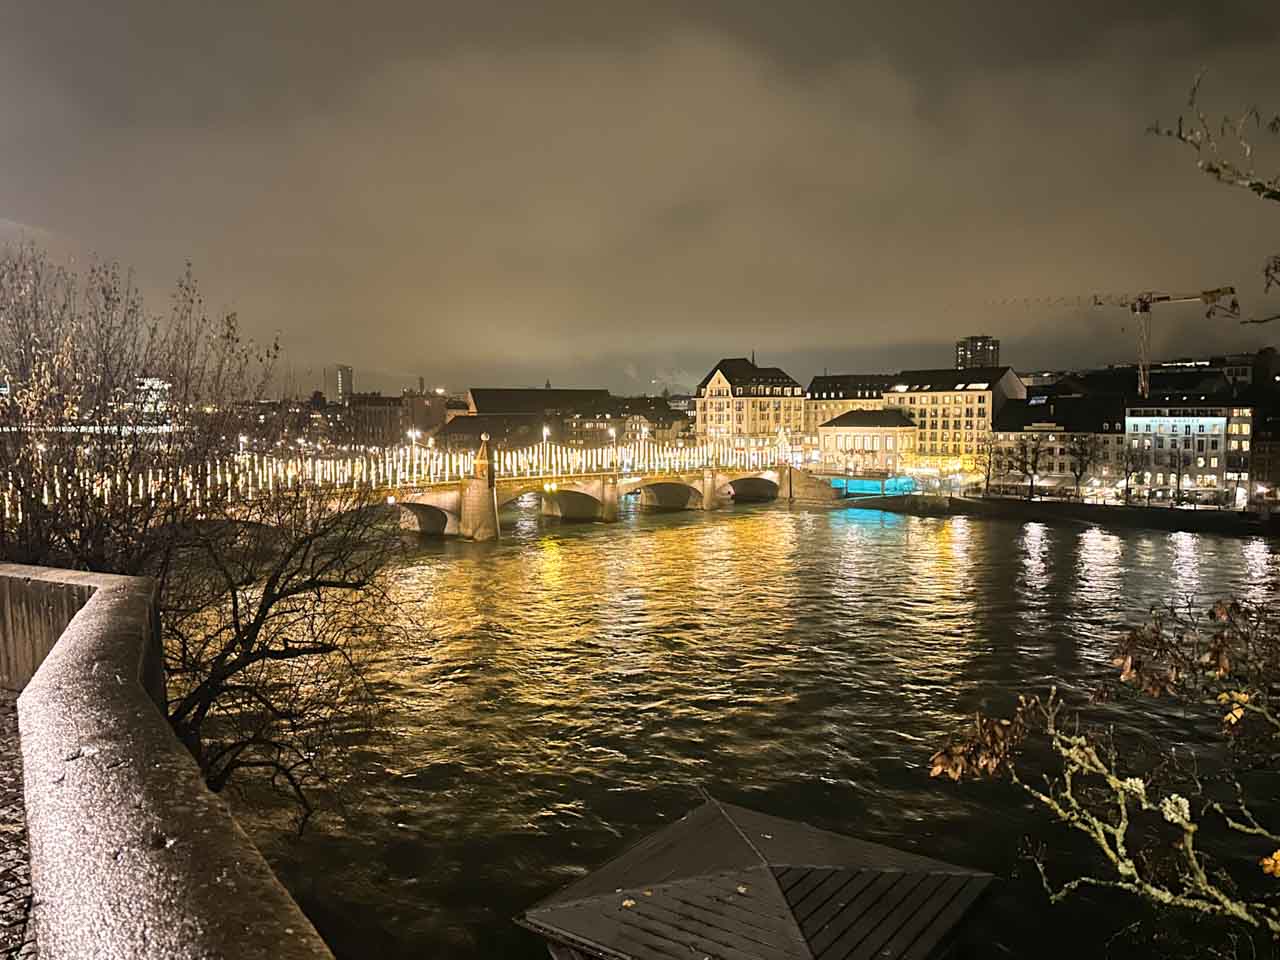 A nighttime view of The Middle Bridge in Basel, beautifully lit and reflected on the Rhine River